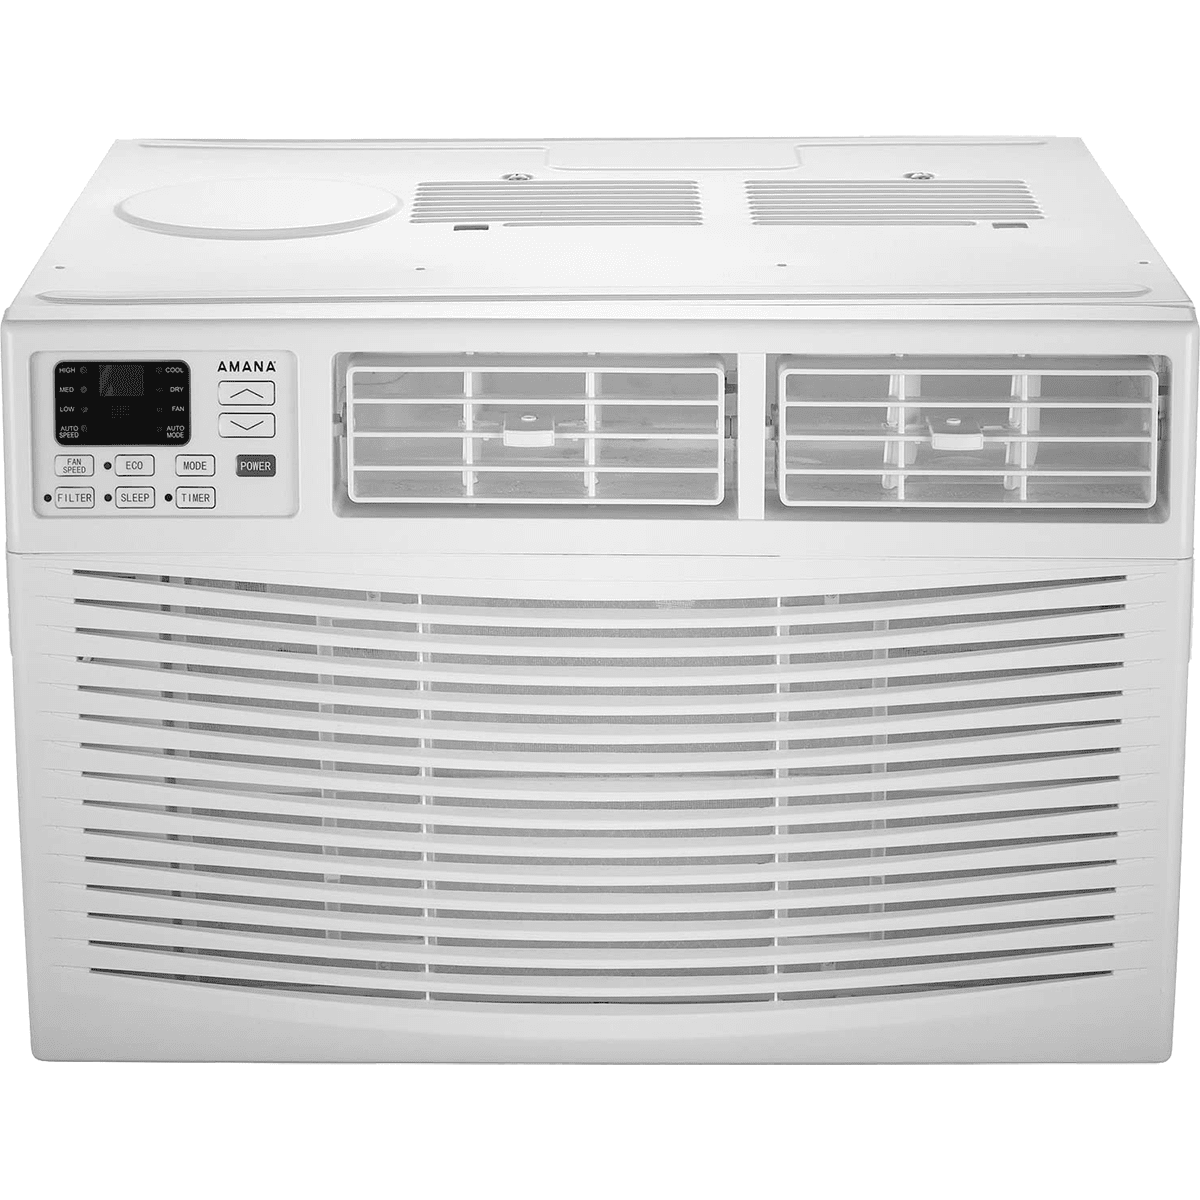 Amana 6,000 BTU Window Air Conditioner with Electronic Controls - AMAP061BW